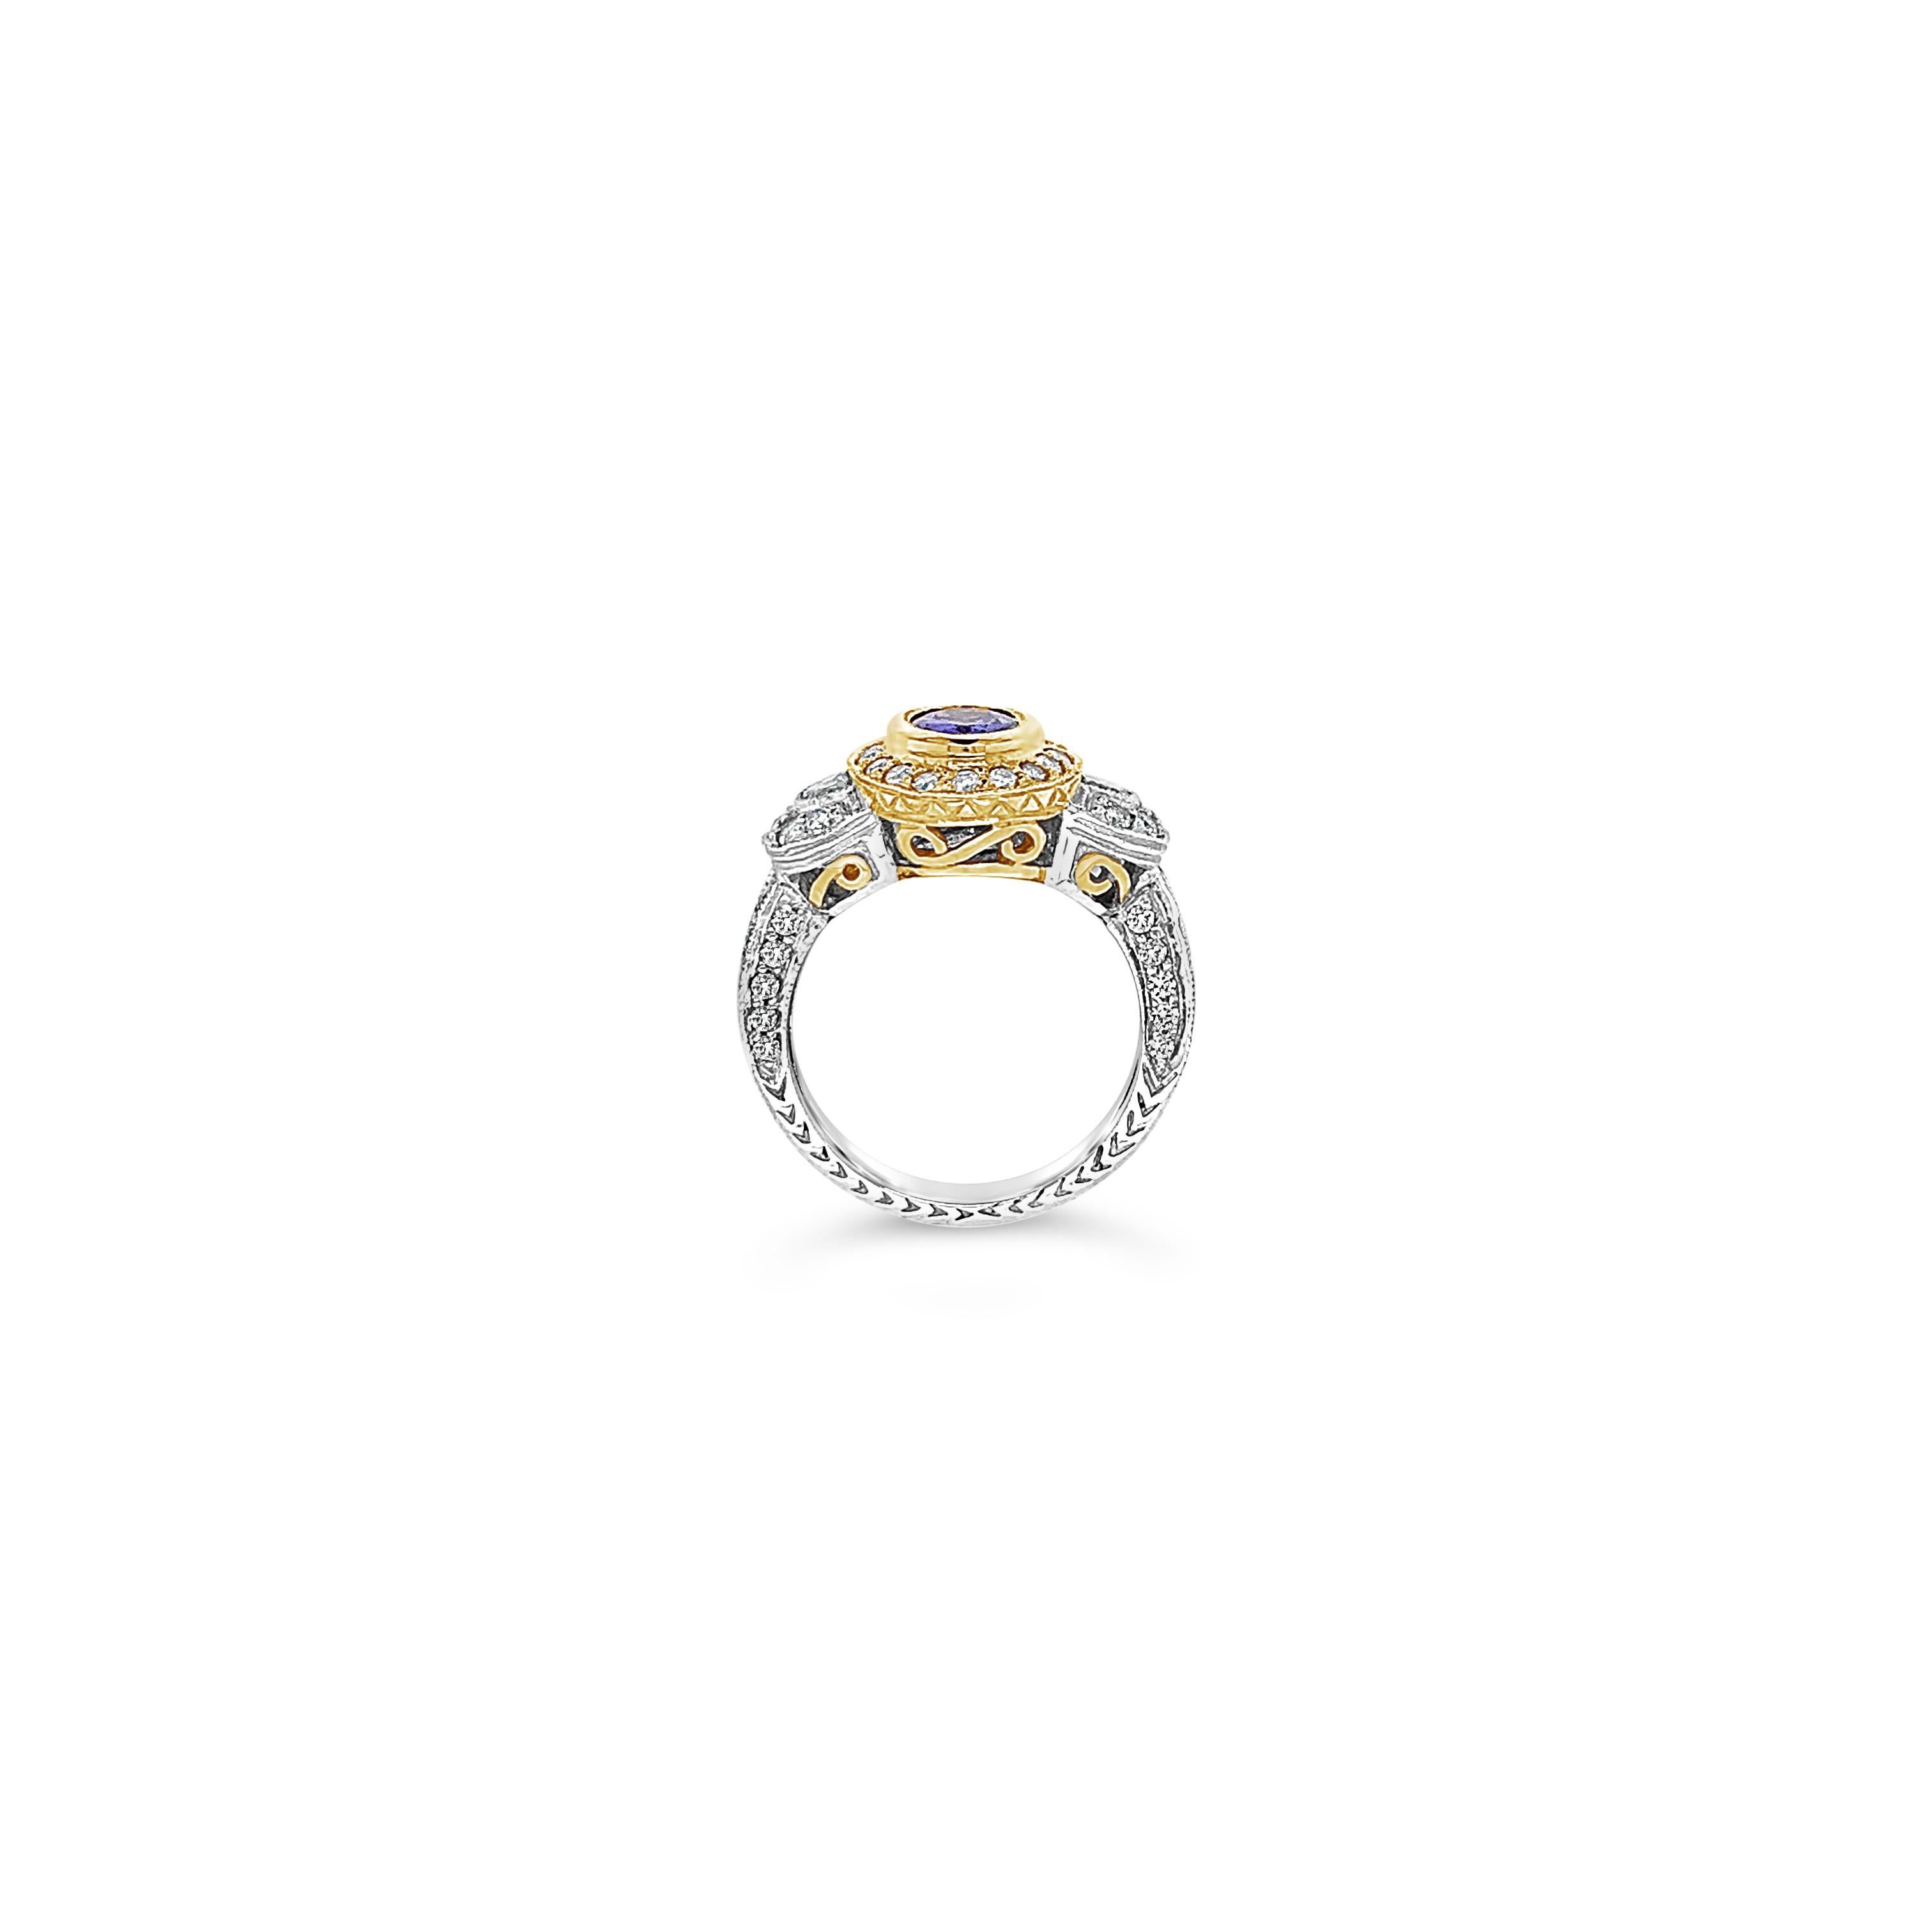 Le Vian Ring featuring 1 cts. Blueberry Tanzanite, 3/8 cts. White Sapphire, 3/4 cts. Vanilla Diamonds set in 14K Two Tone Gold. Please feel free to reach out with any questions! Item comes with a Le Vian jewelry box as well as a Le Vian suede pouch!